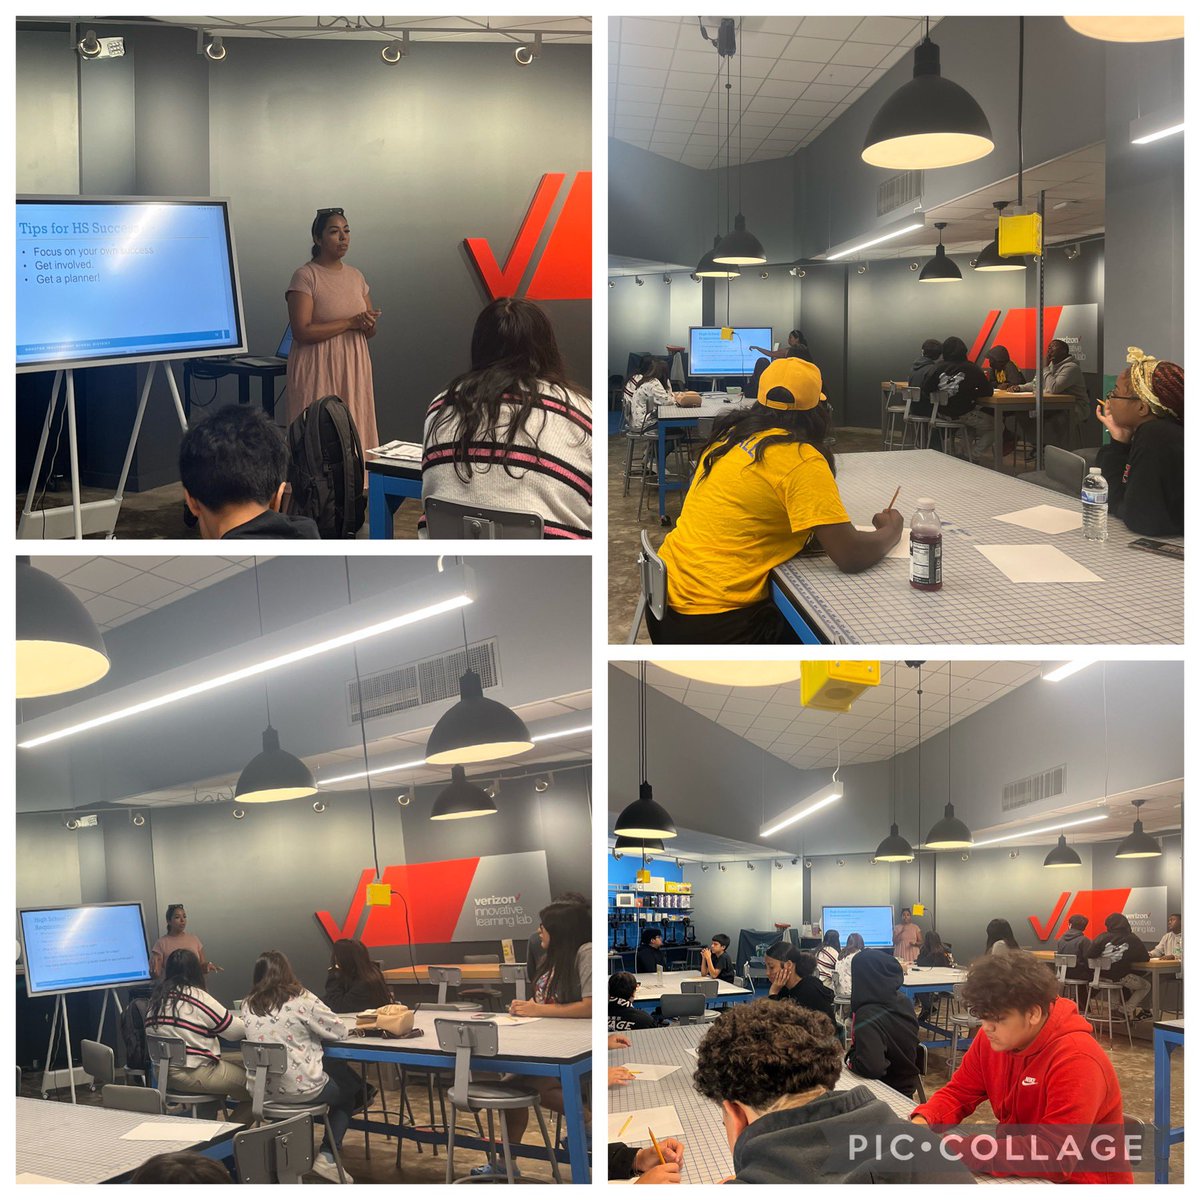 We would like to thank Ms. Castilla from @HISD2College Ignite team for an excellent transition presentation to our @HollandHISD @HISD_ProjectEx 8th grade students. Our students are getting prepare to have a successful transition. #Highschool🎓